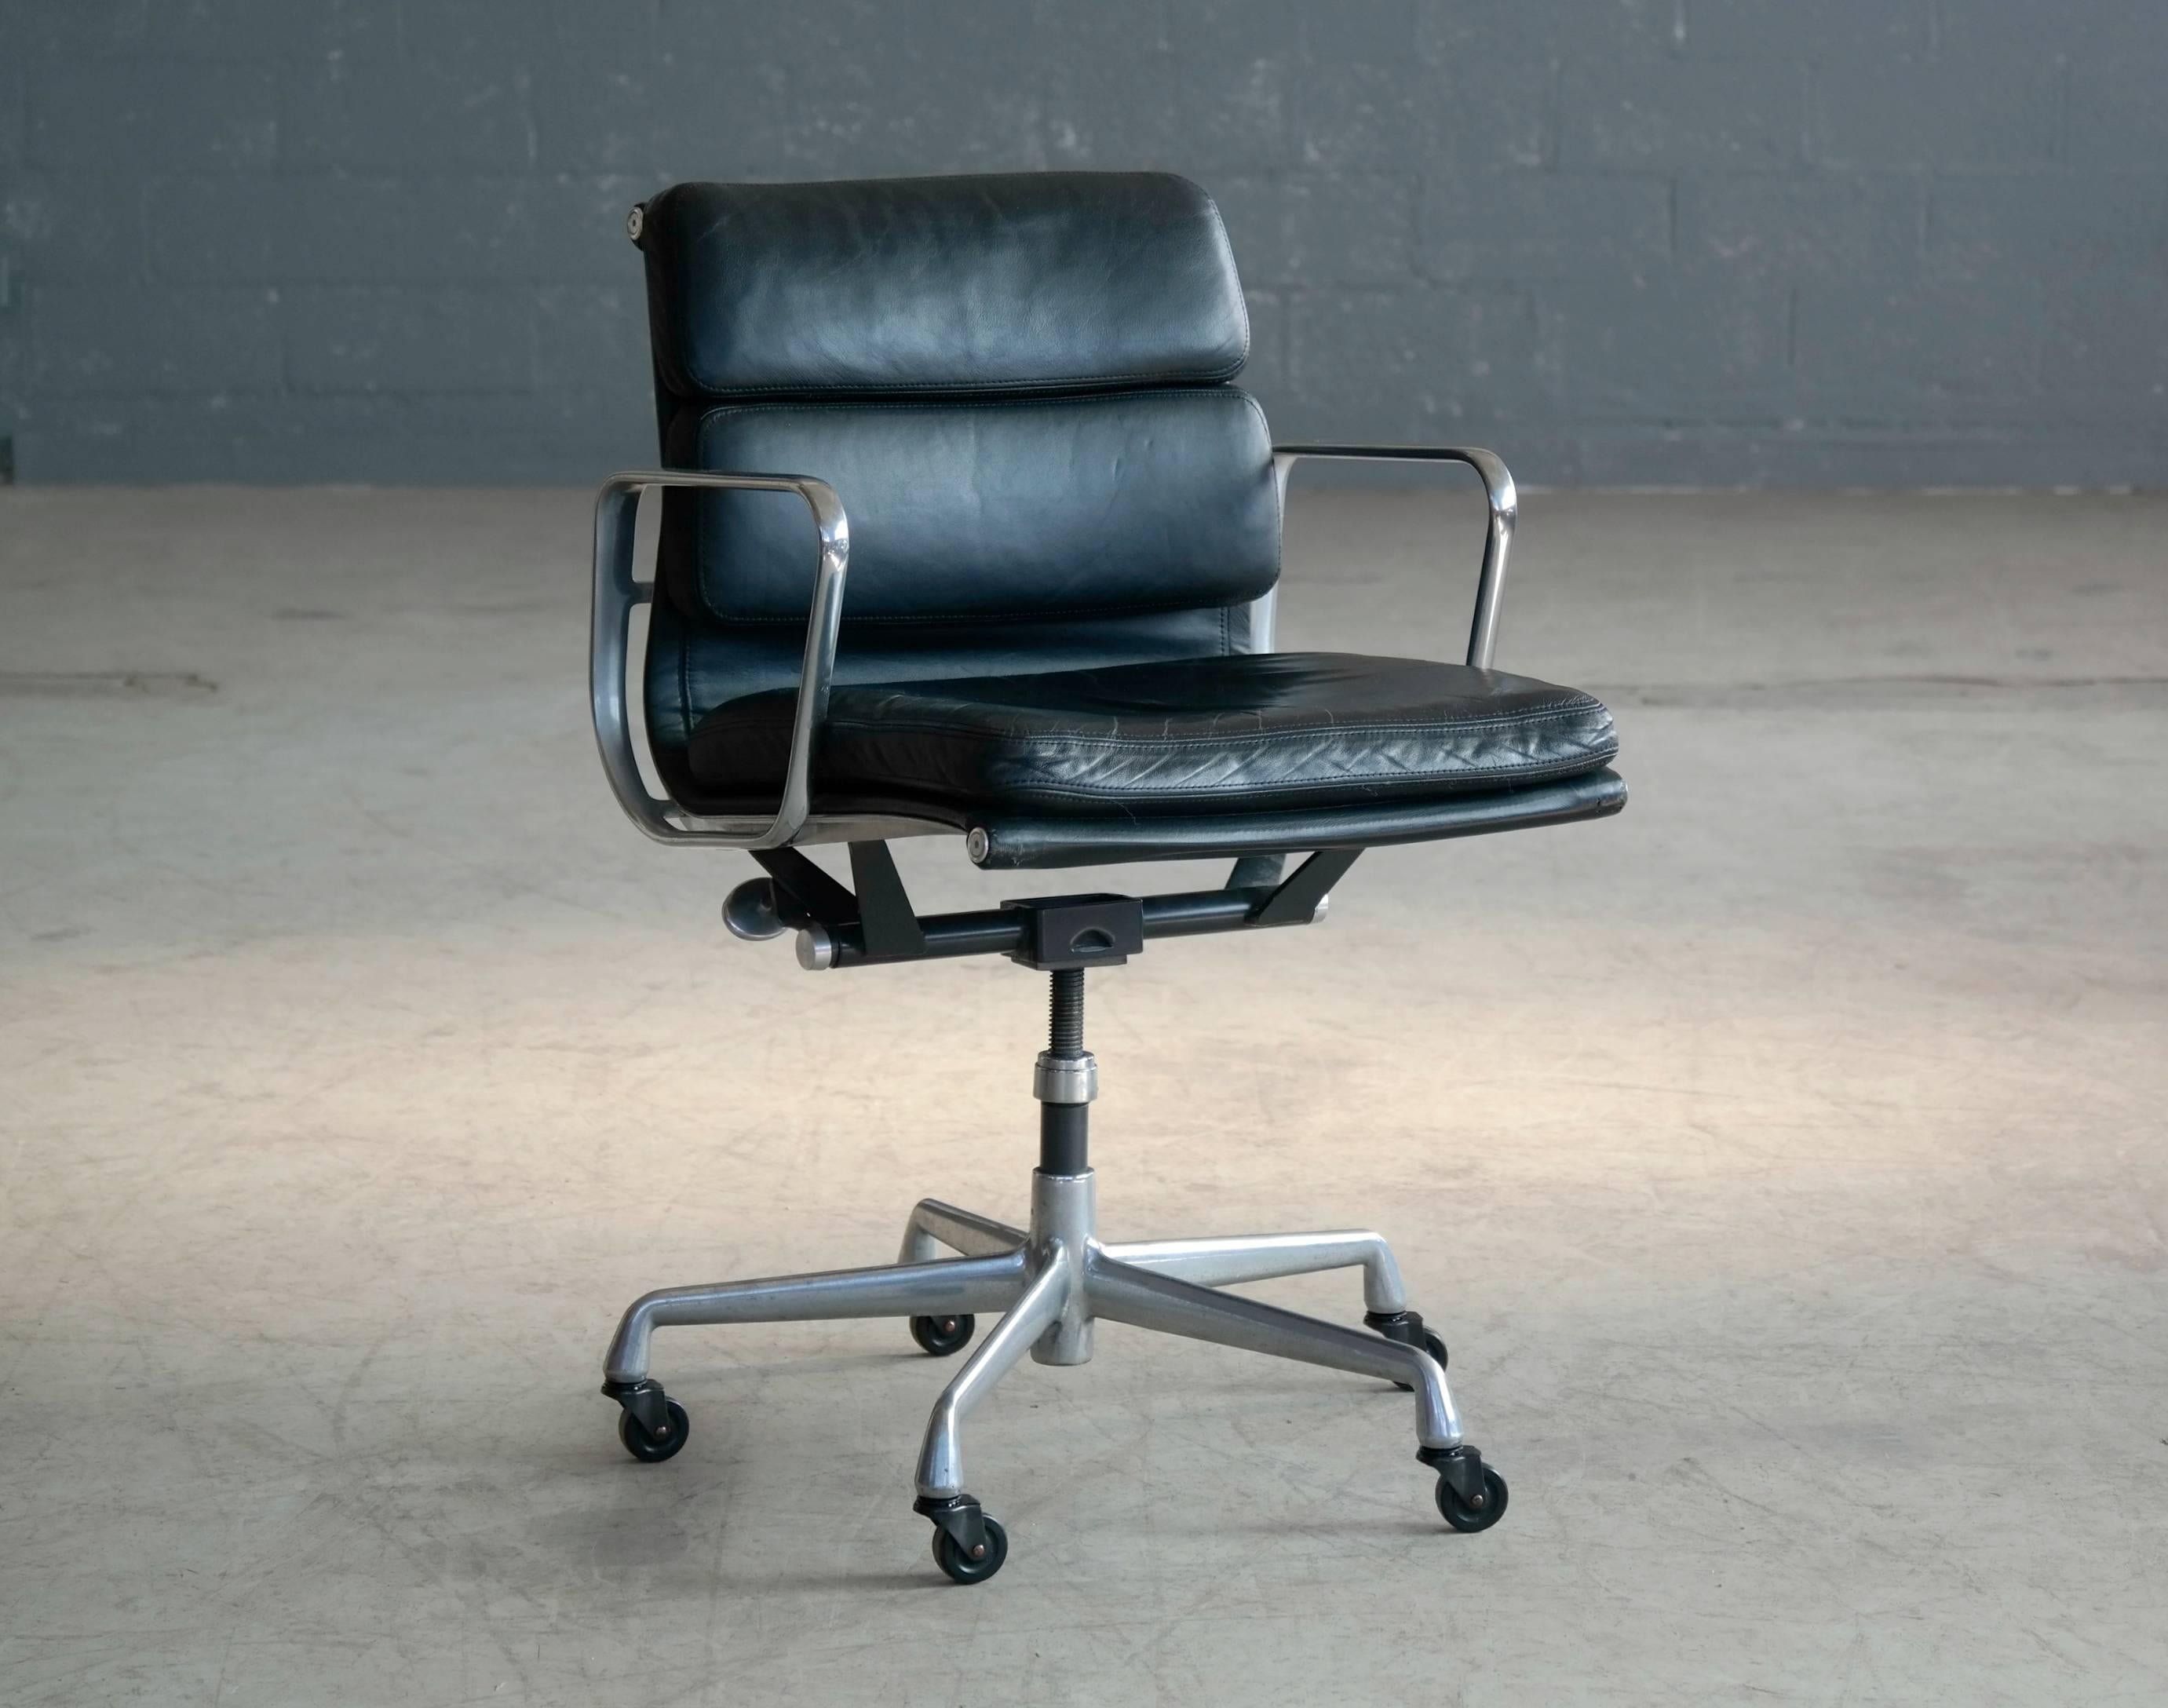 Classic Soft Pad Management chair by Ray and Charles Eames. Supple black leather and chromed aluminum with caster wheels and adjustable seat. This is the European model made by ICF under license from Herman Miller. The European model distinguishes